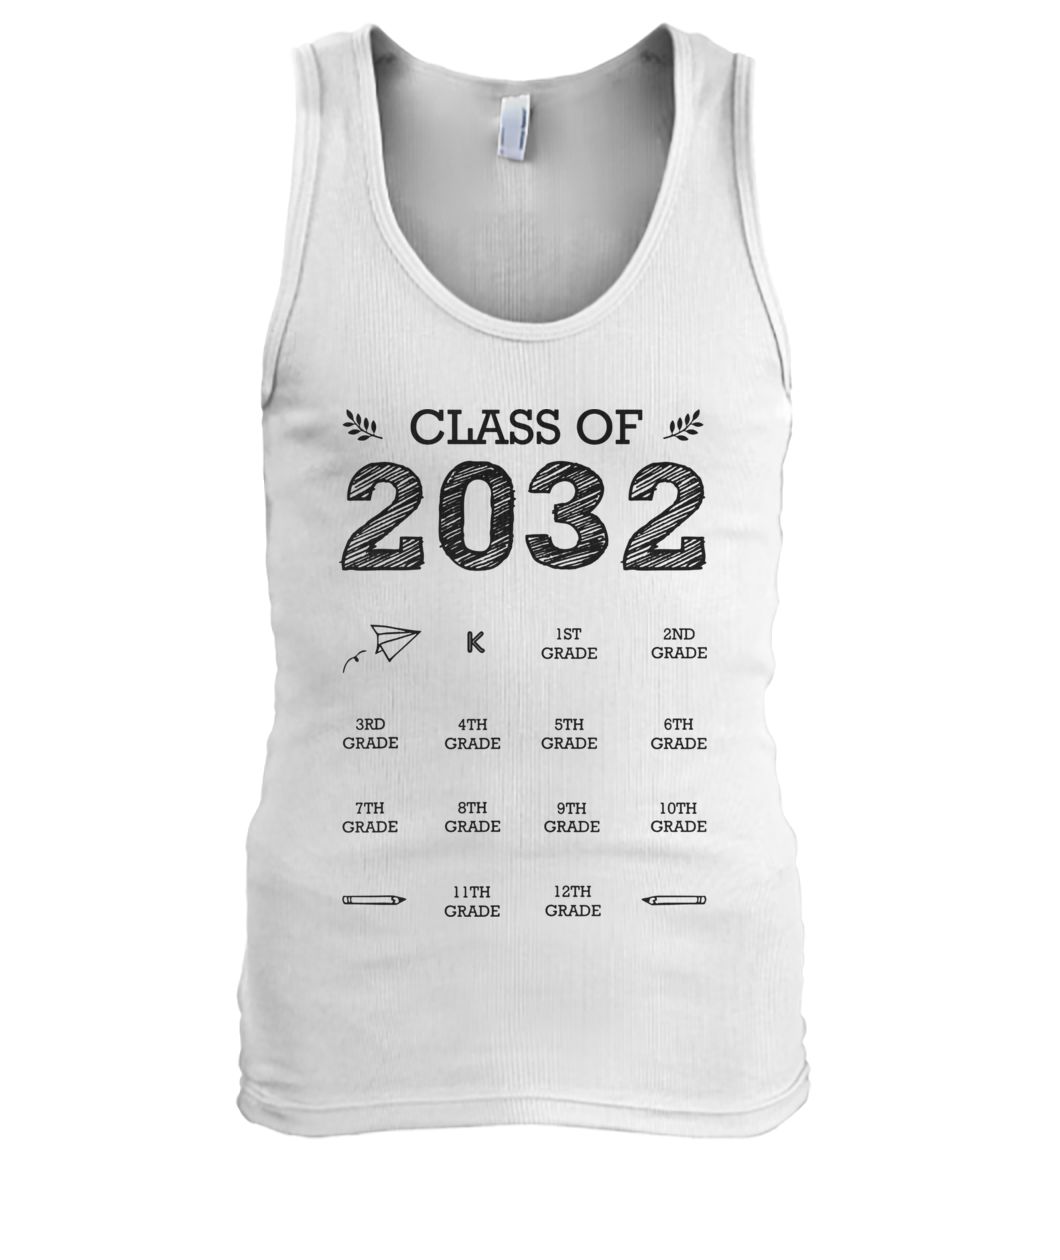 Class of 2032 grow with me with space for check marks men's tank top